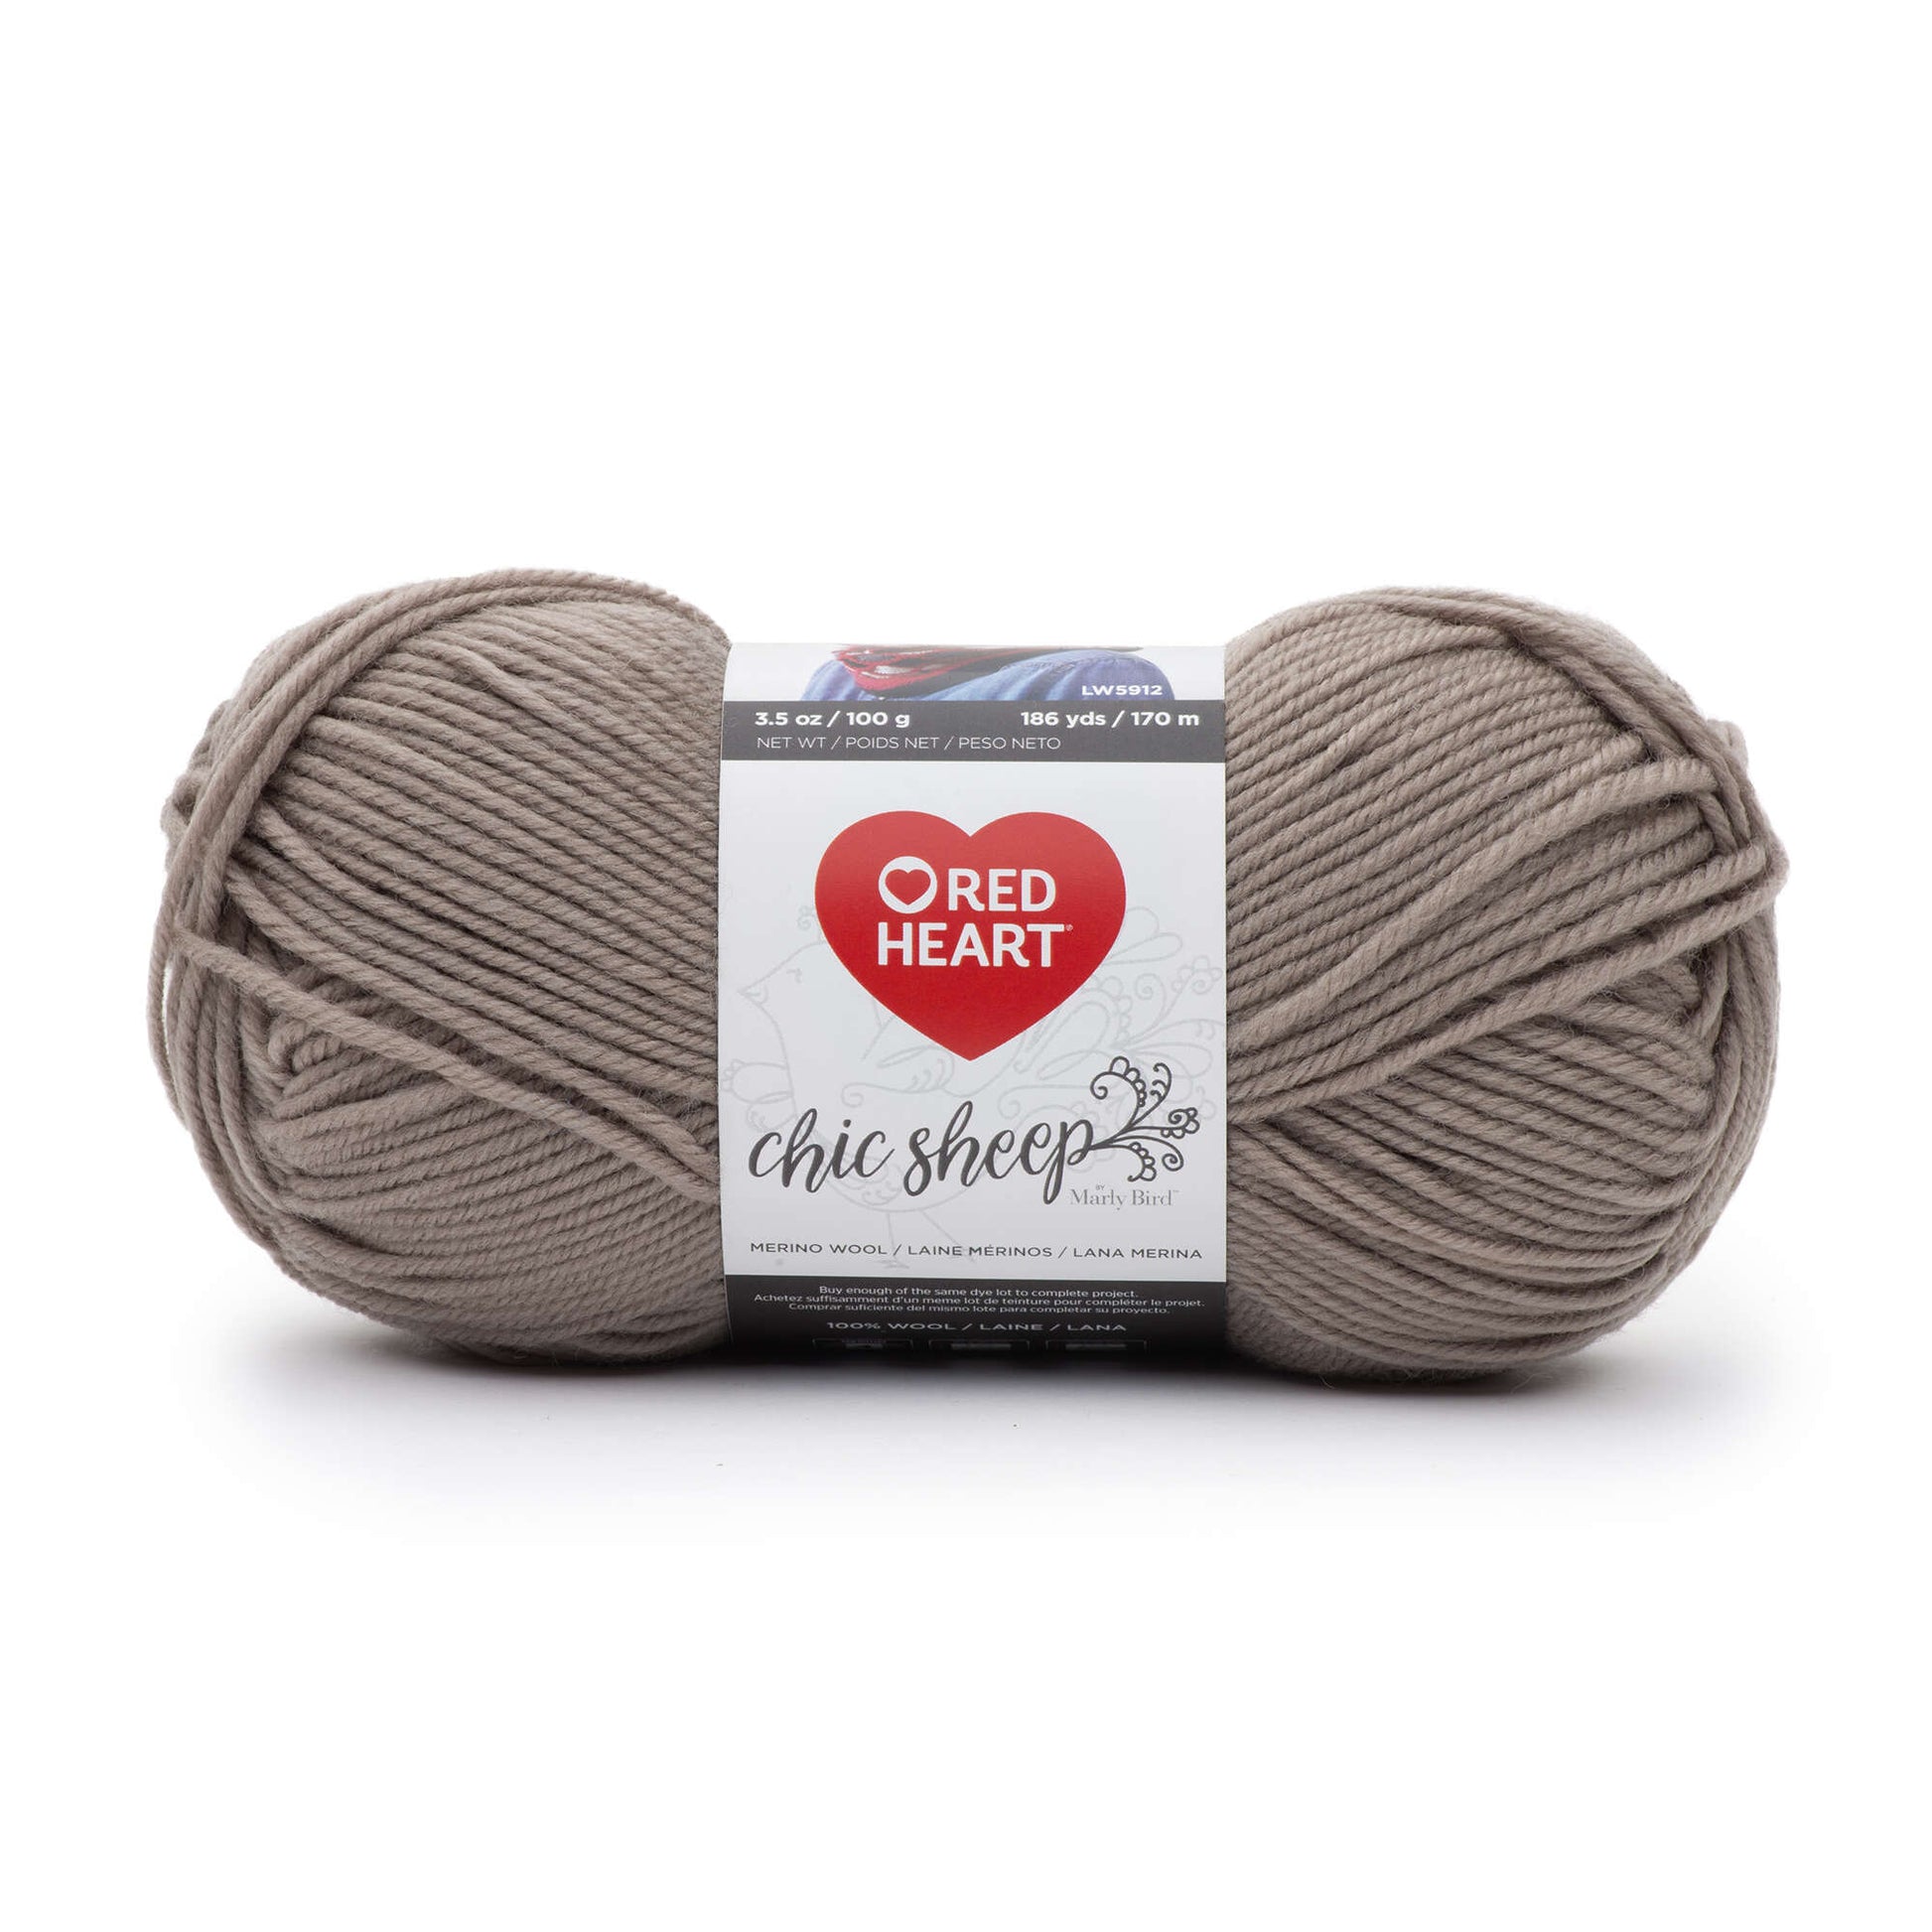 Red Heart Chic Sheep Yarn - Clearance shades Suede